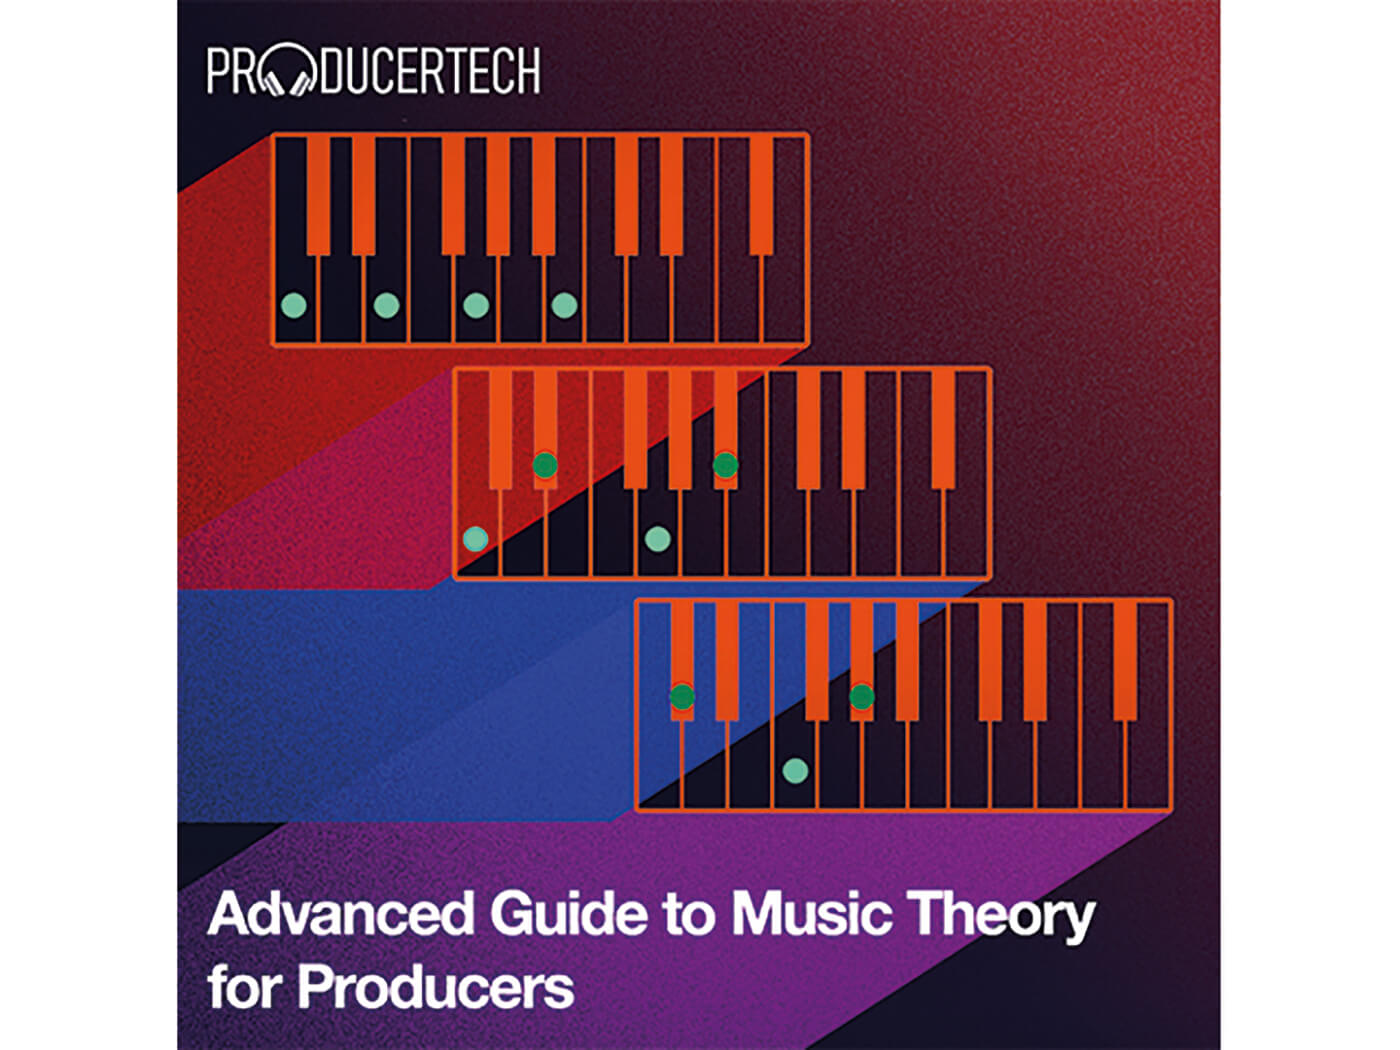 Producertech Music Theory for Producers